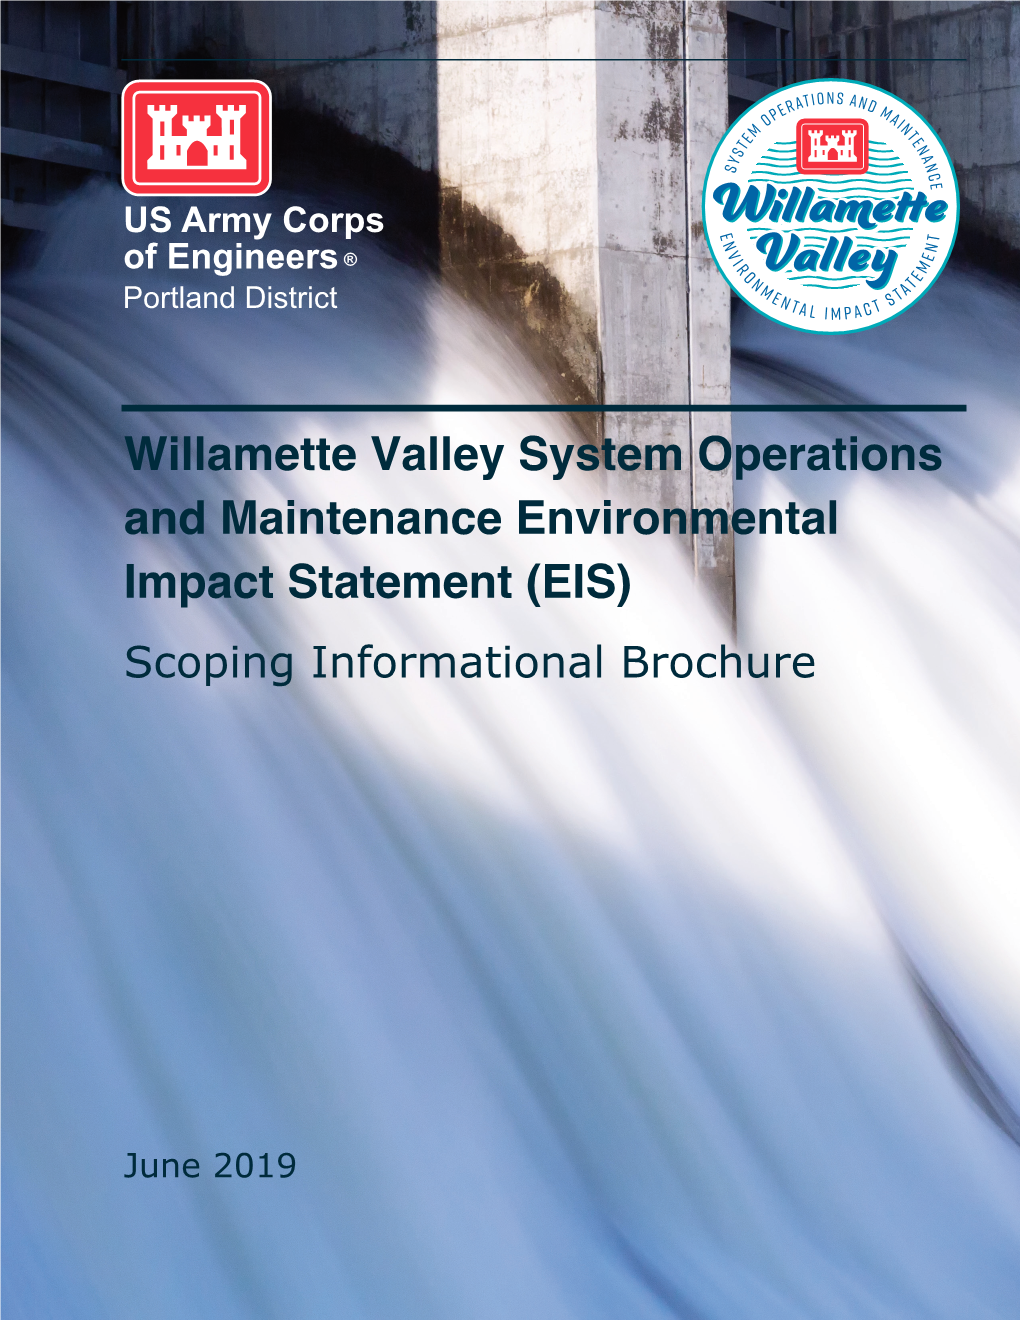 Willamette Valley System Operations and Maintenance Environmental Impact Statement (EIS) Scoping Informational Brochure